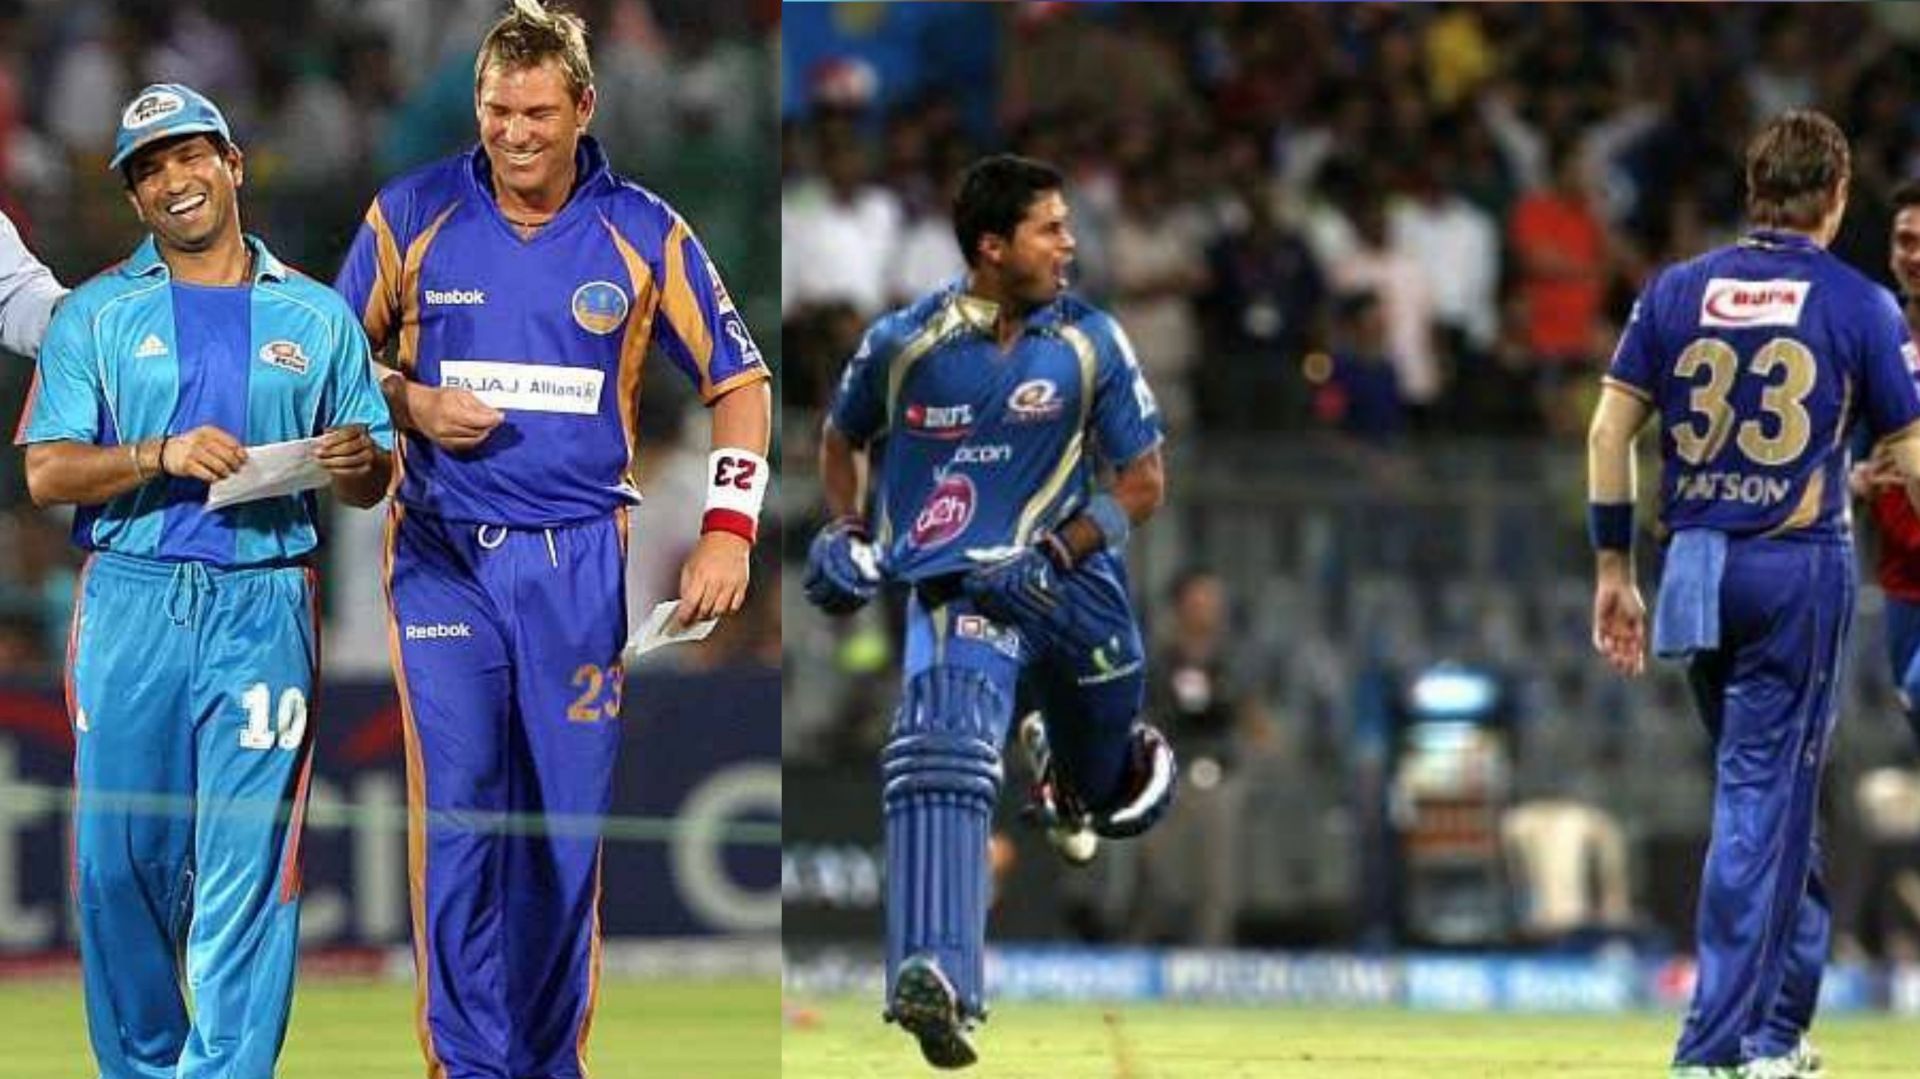 Mumbai Indians and Rajasthan Royals have had some great IPL matches